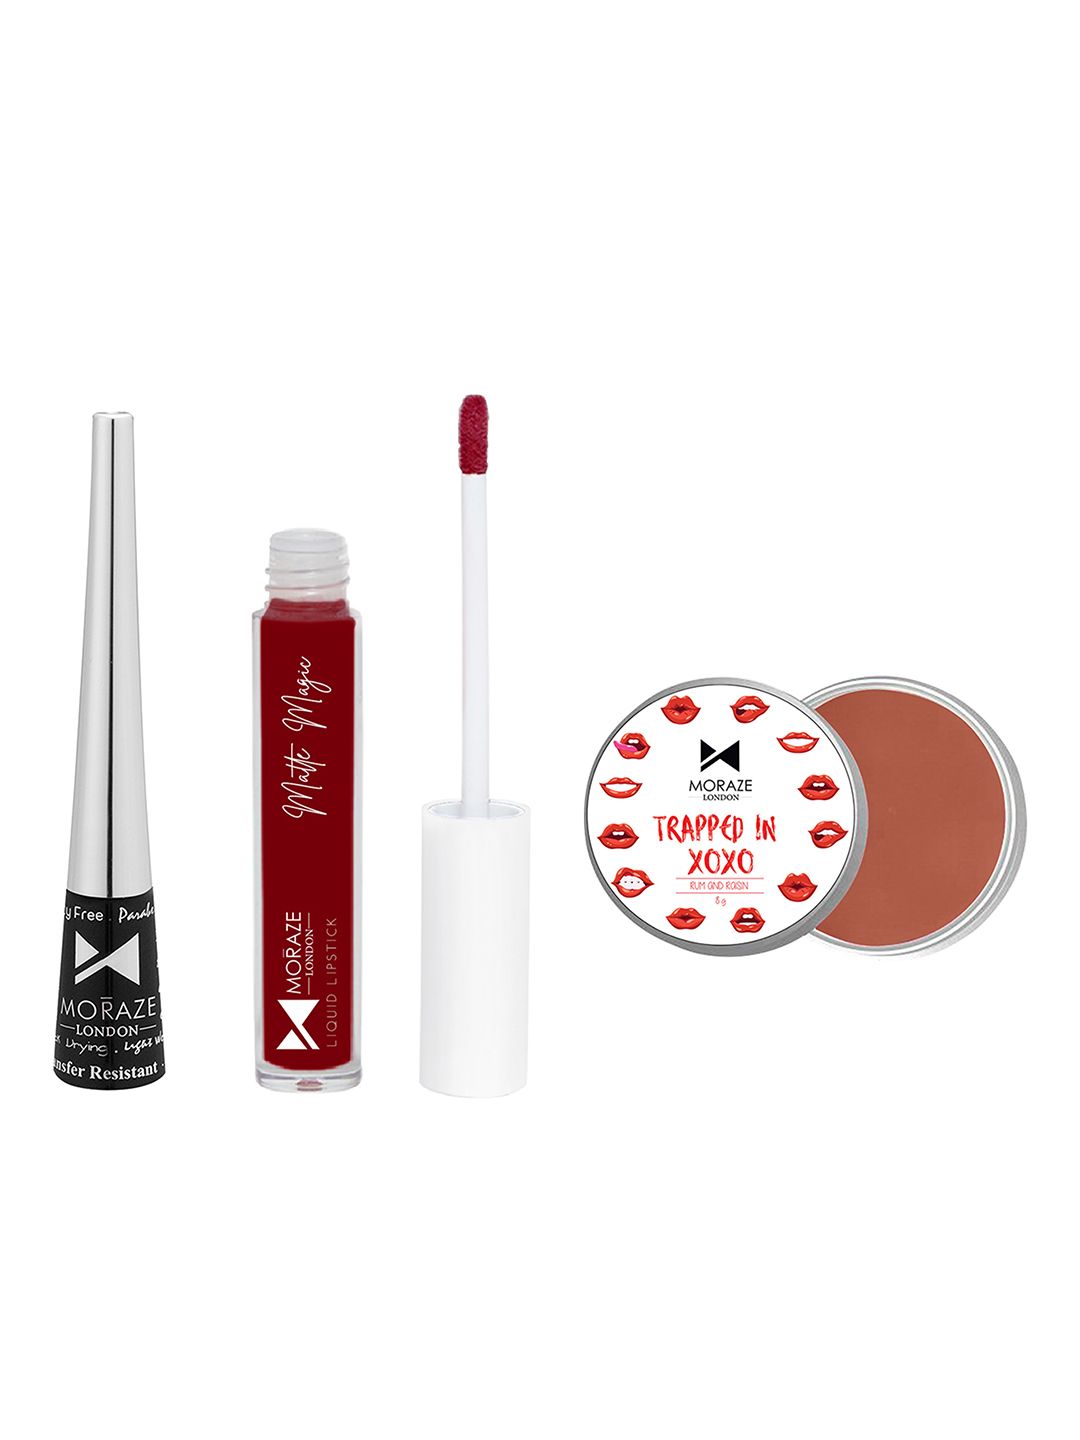 Moraze Set Of 1 Eyeliner With 1 Red Liquid Lipstick & 1 Brown Lip Balm Price in India